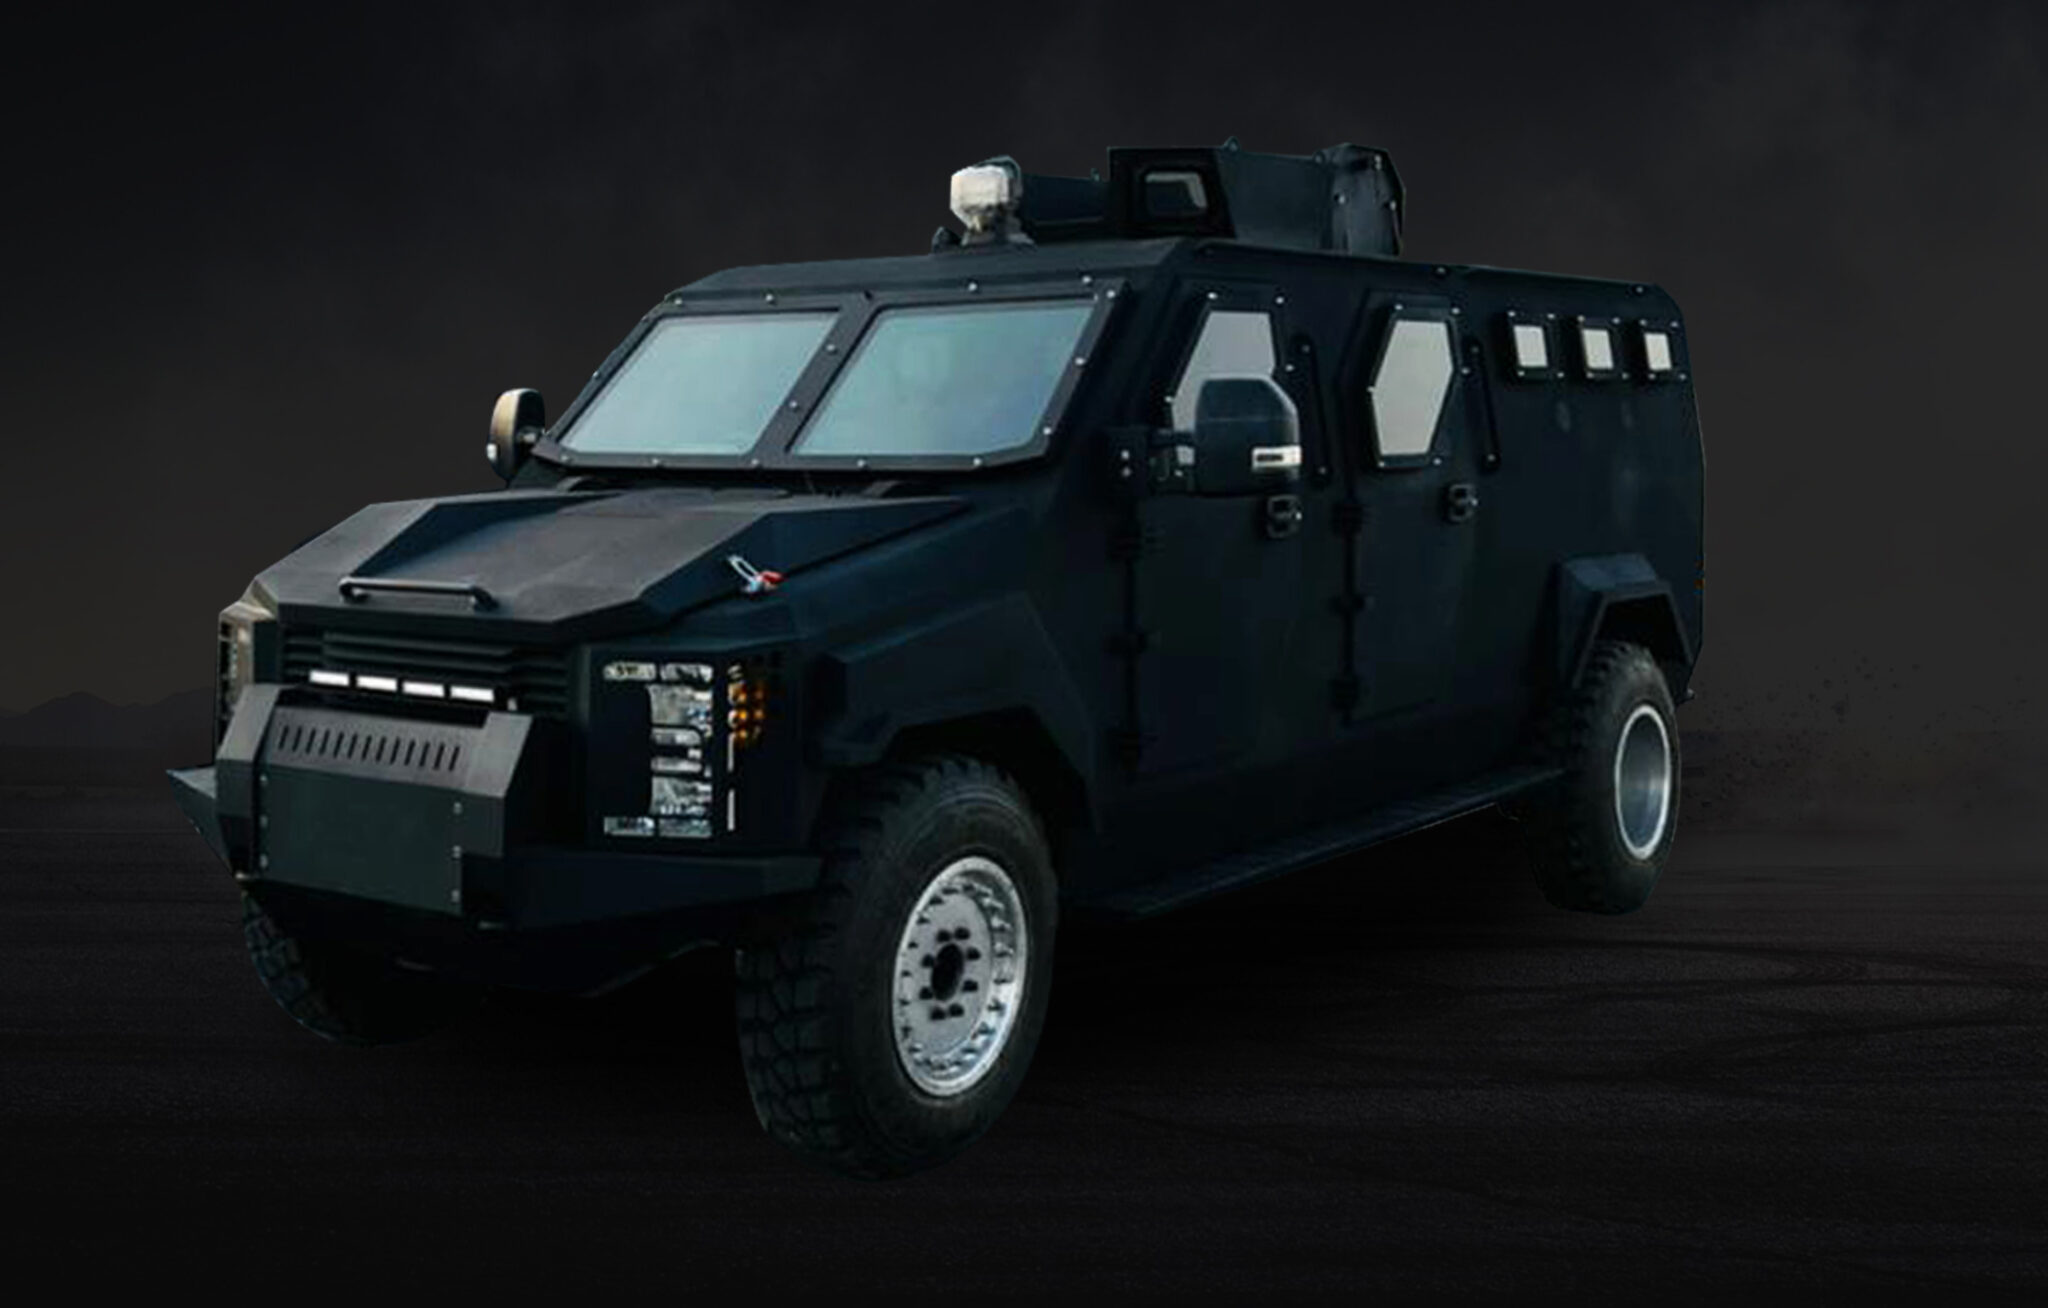 The Art Of Protection: Mastering Craftsmanship In Armored Car Construction